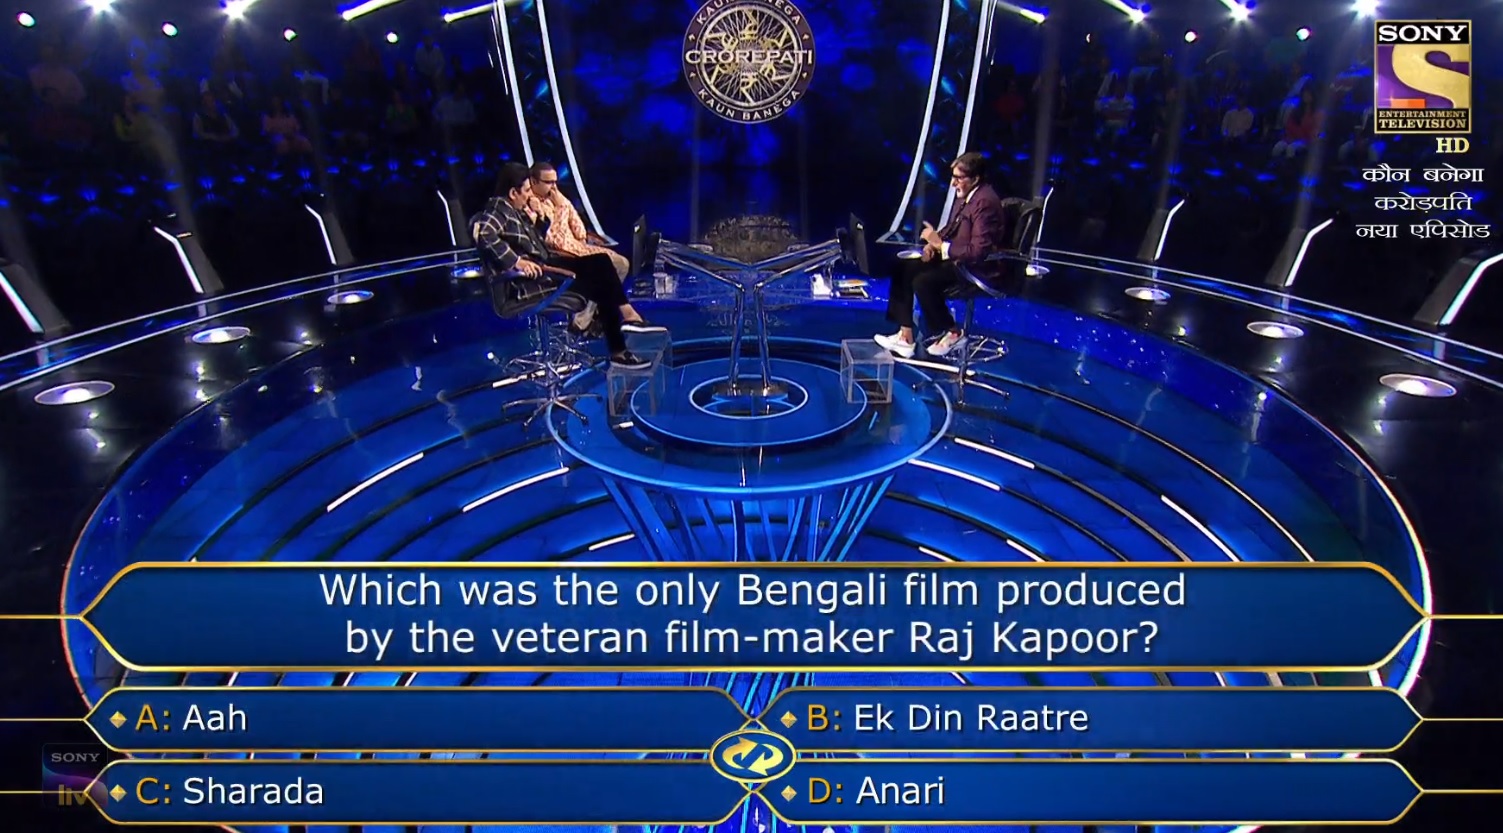 Ques : Which was the only Bengali film produced by the veteran film-maker Raj Kapoor?